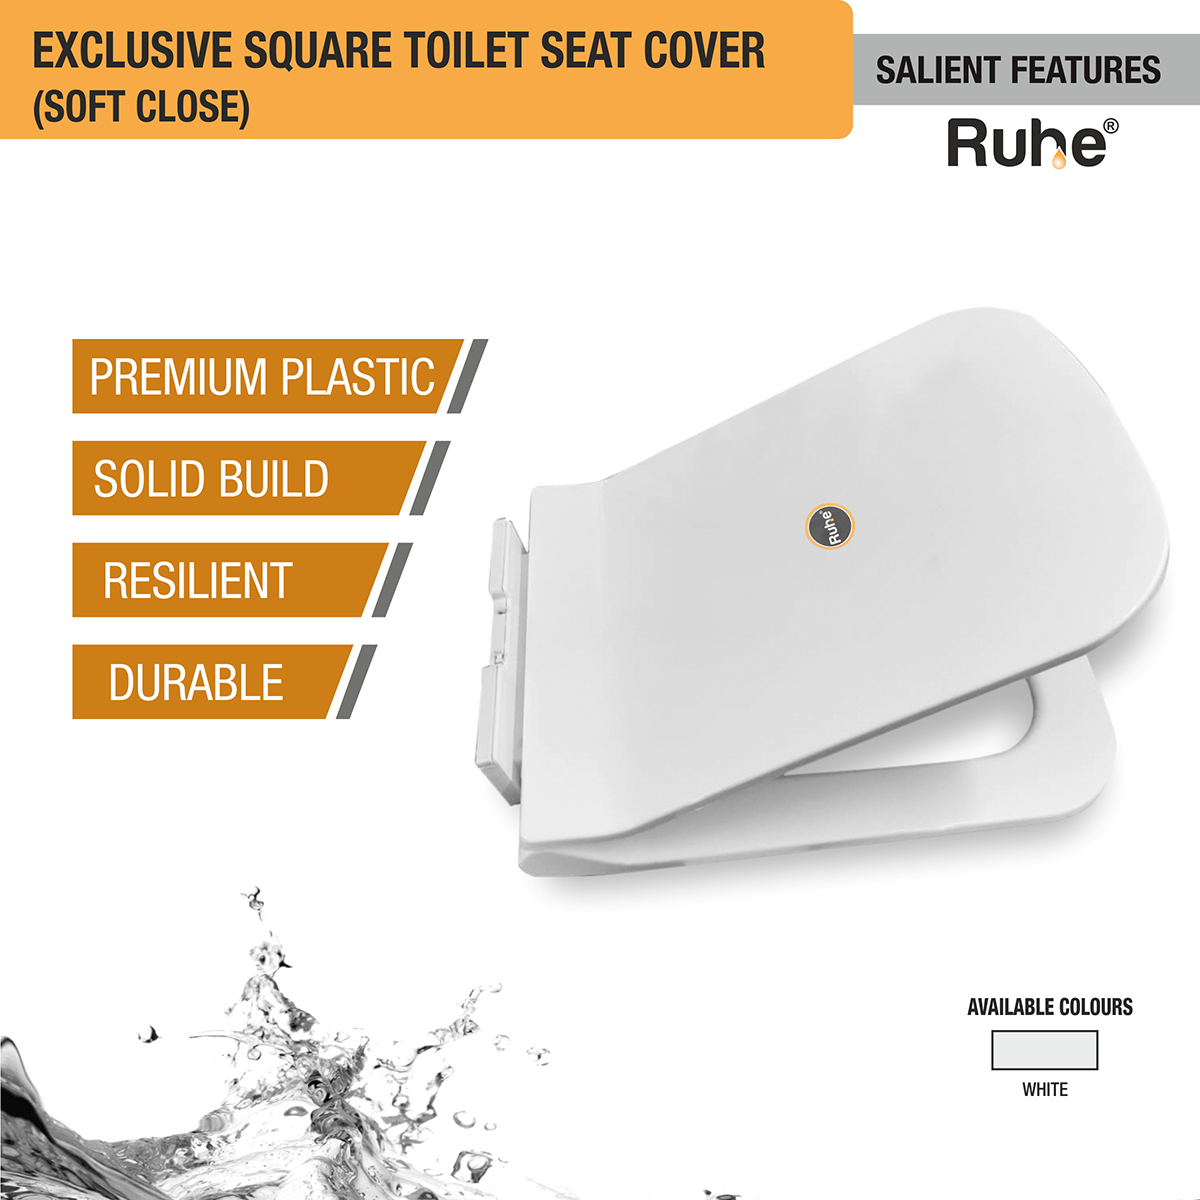 Exclusive Square Toilet Seat Cover (White) (Soft Close) features and benefits